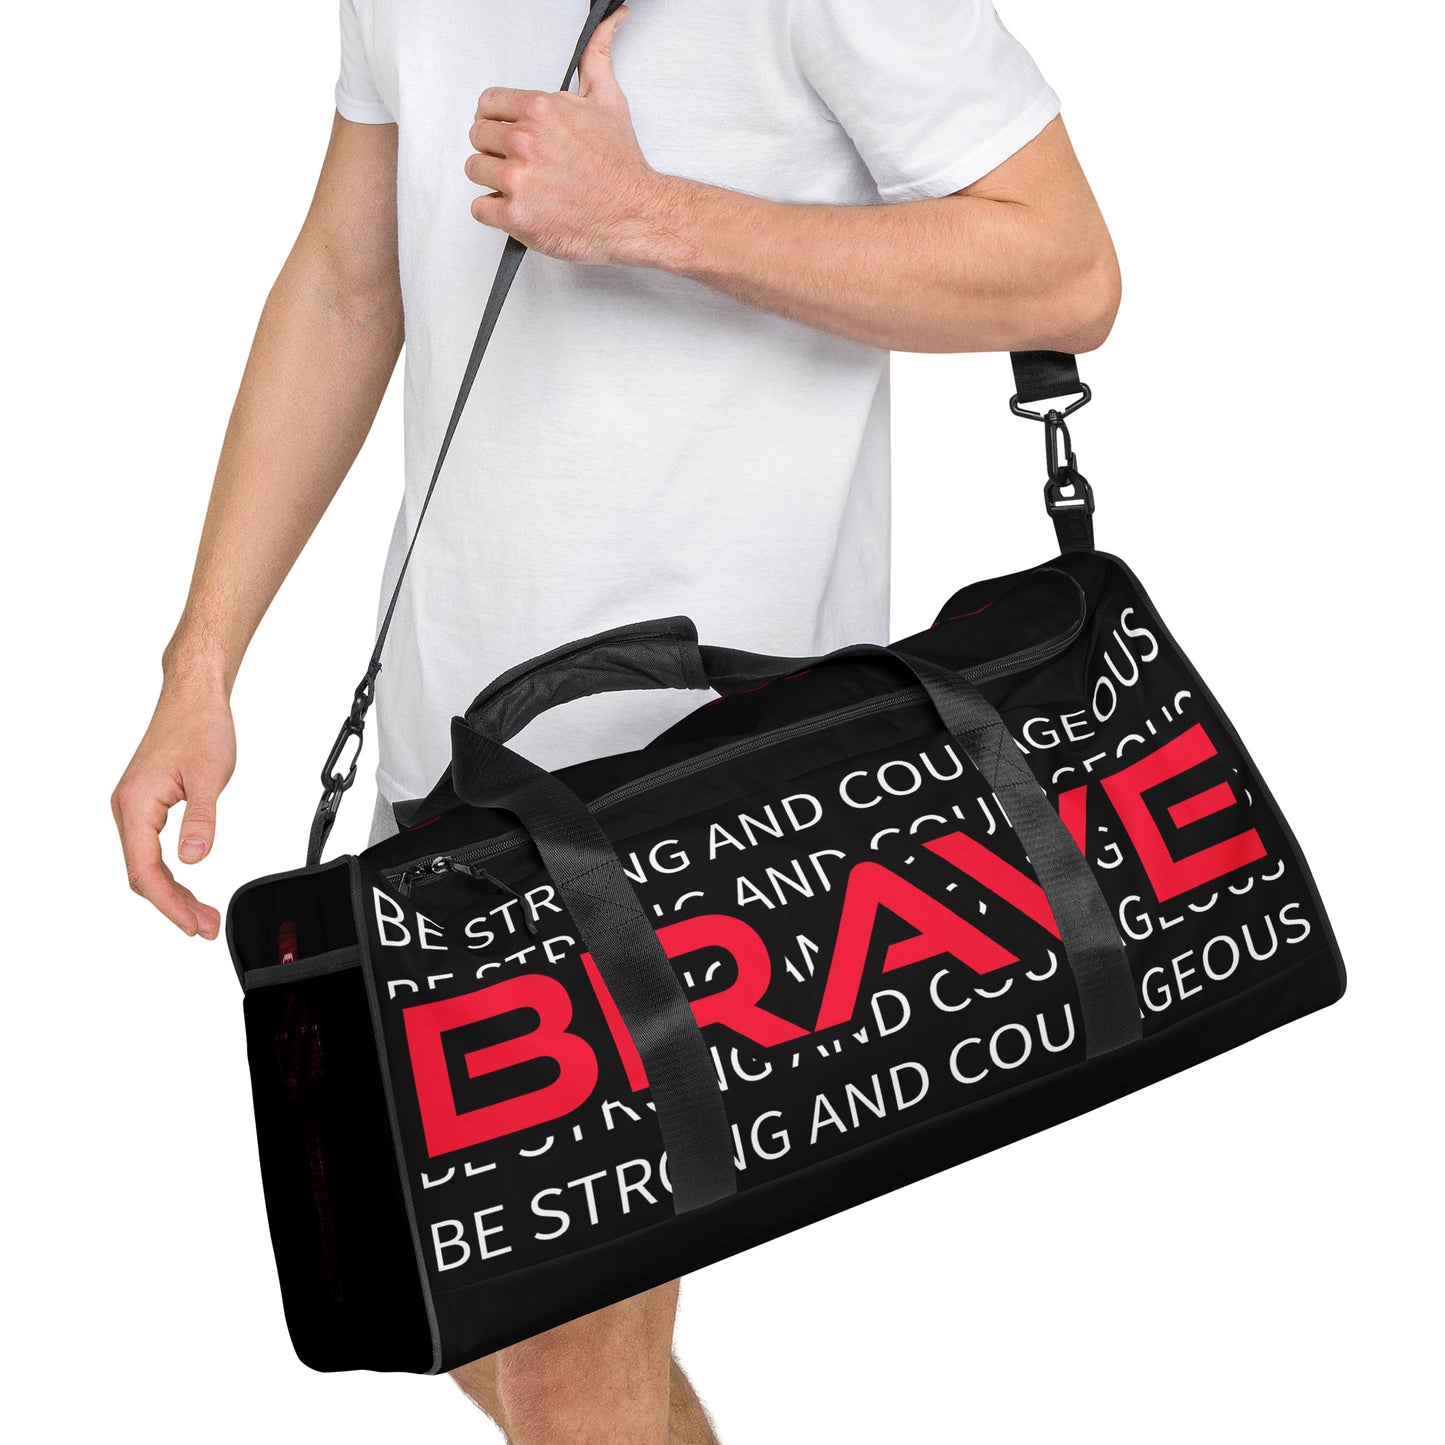 Be Strong and Courageous- Duffle bag